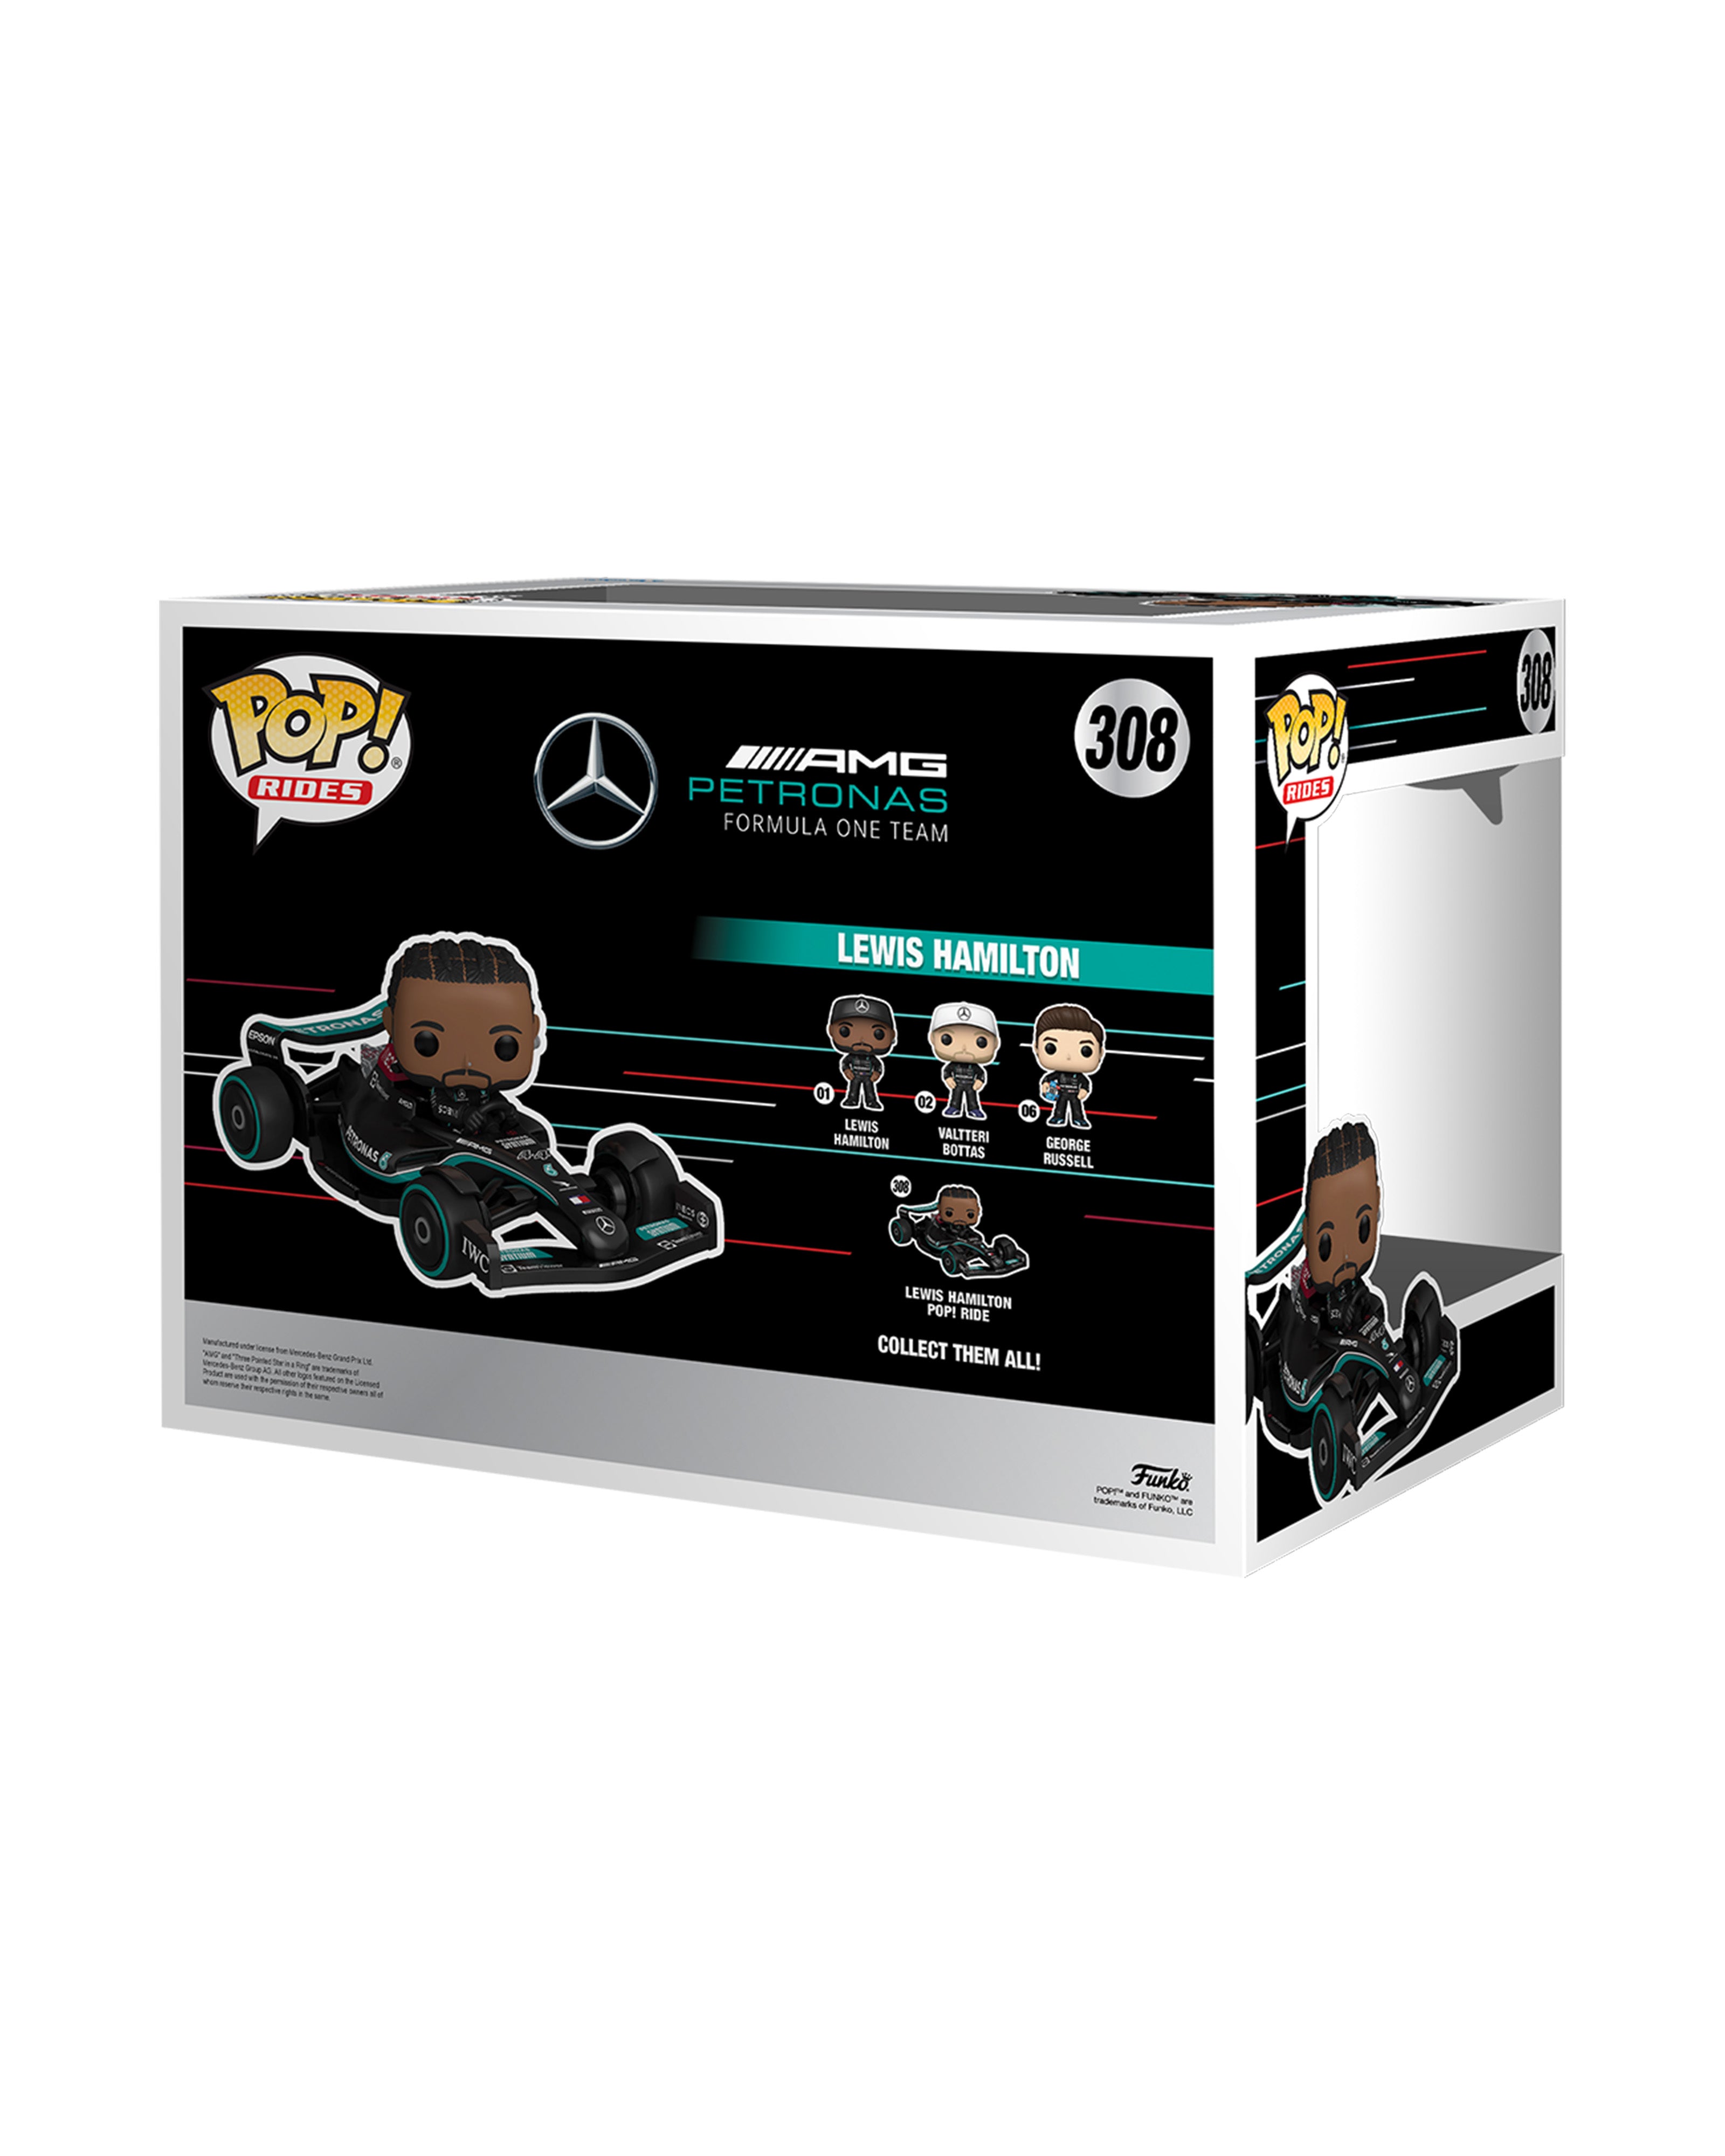 Formula 1 Funko Pop Rides  This Is What Funko Needs To Make More Of! 